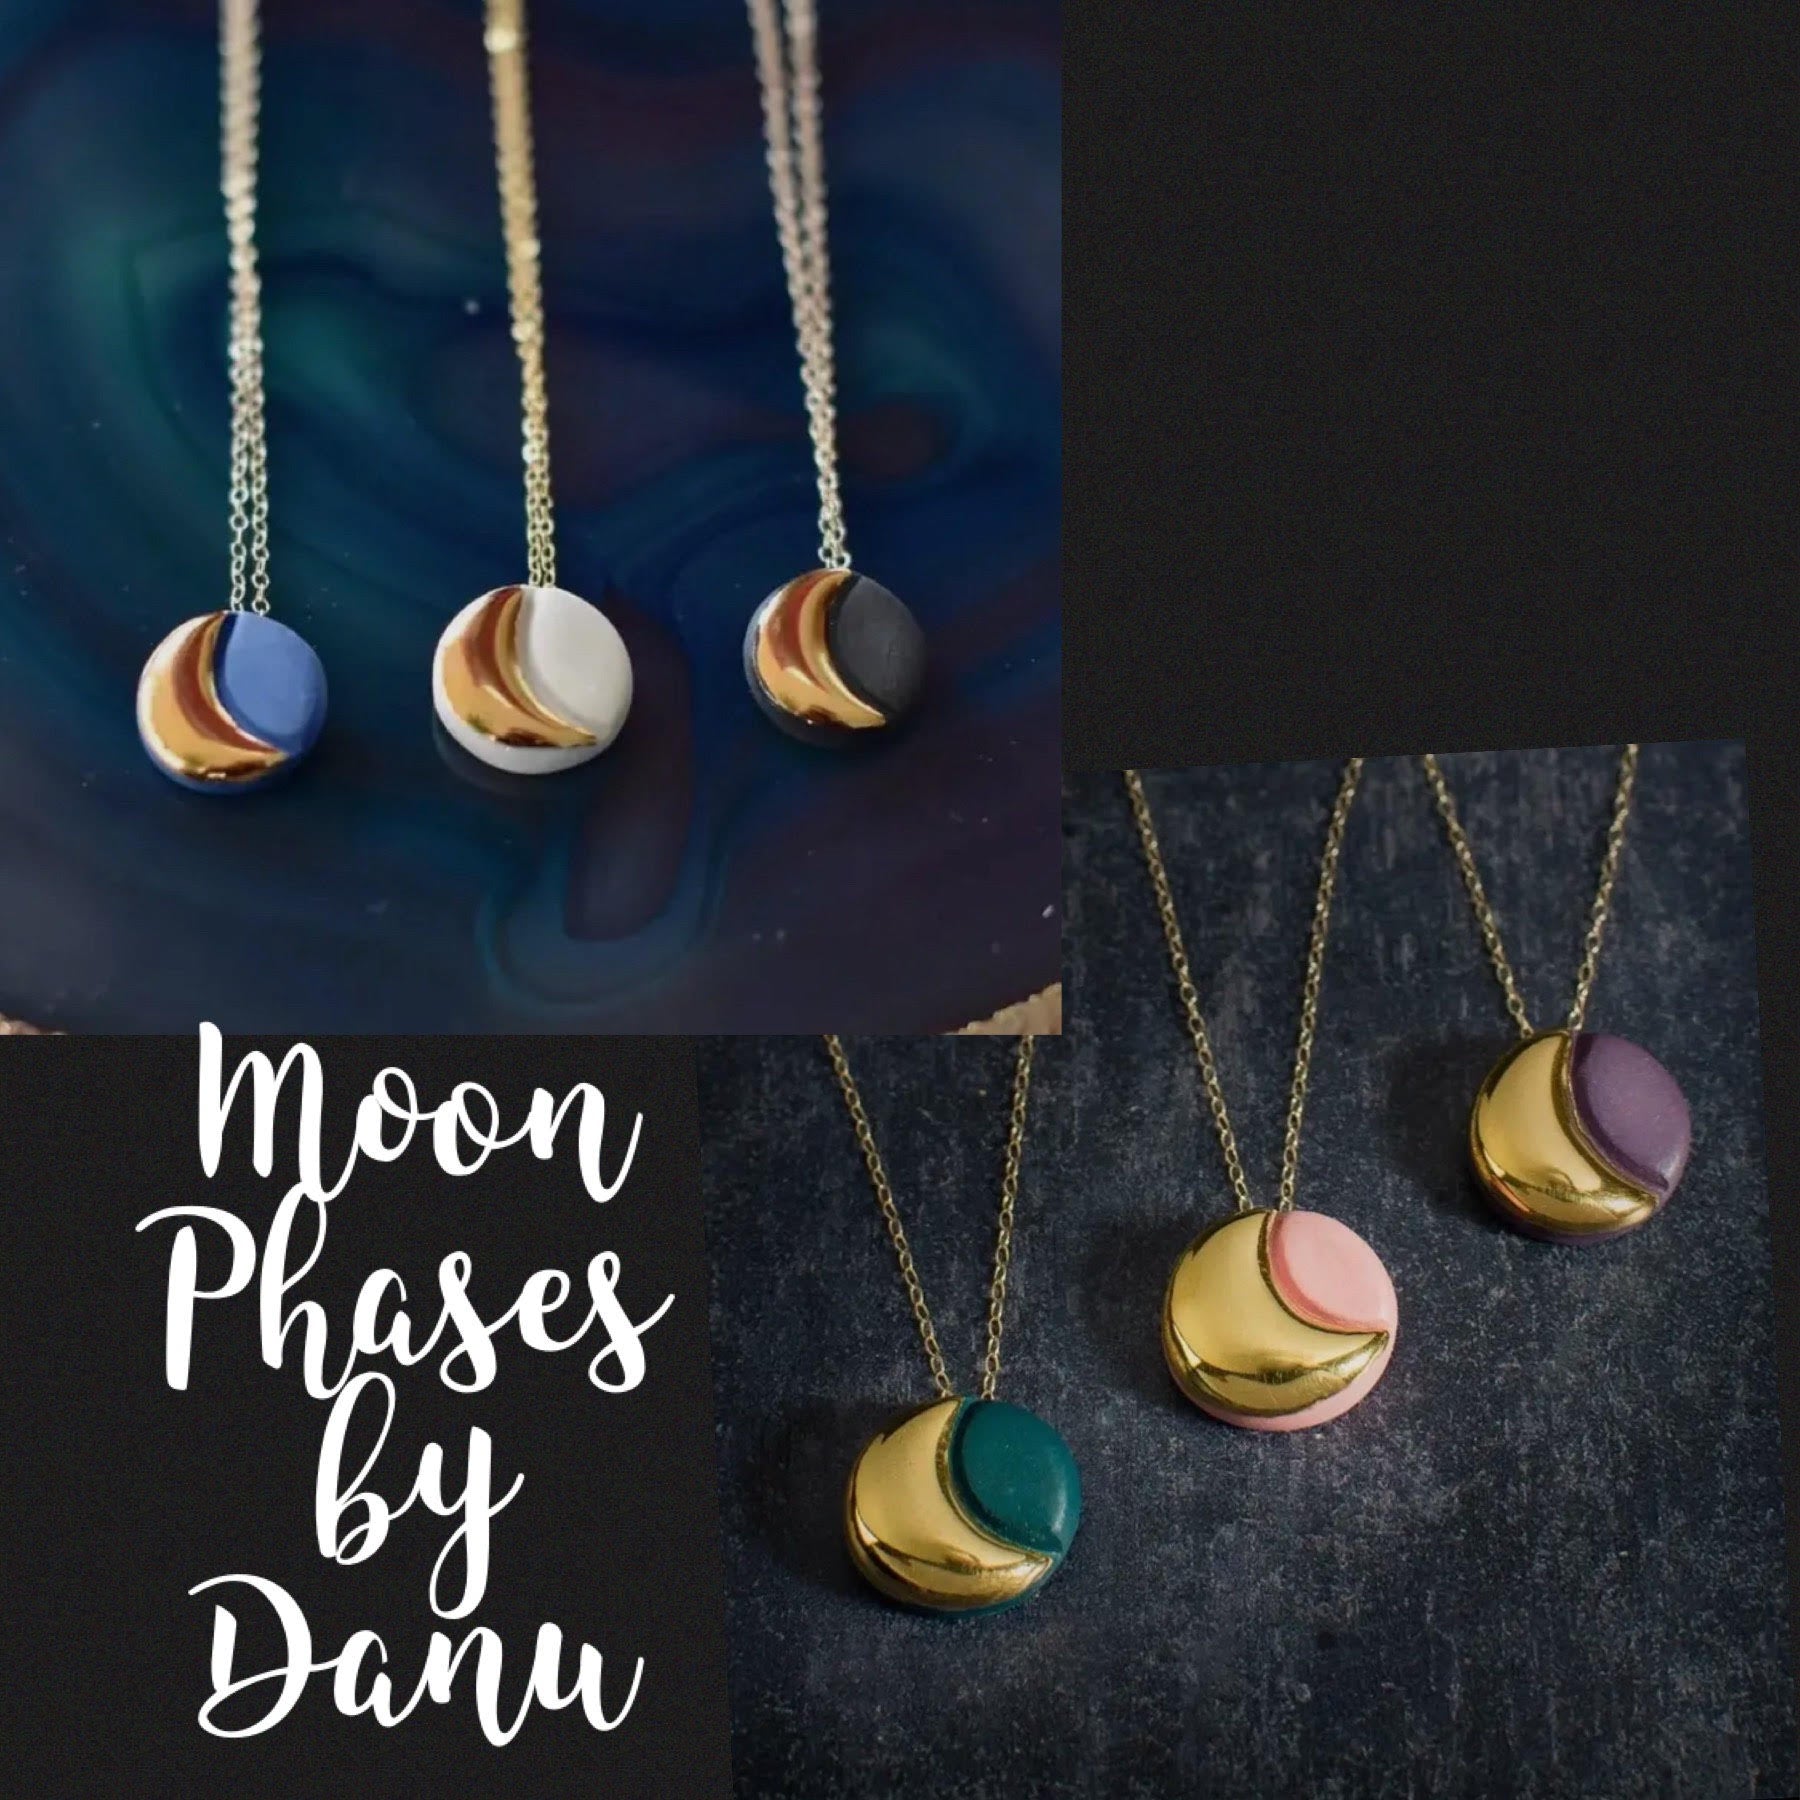 Phases of the Moon Necklace by Danu